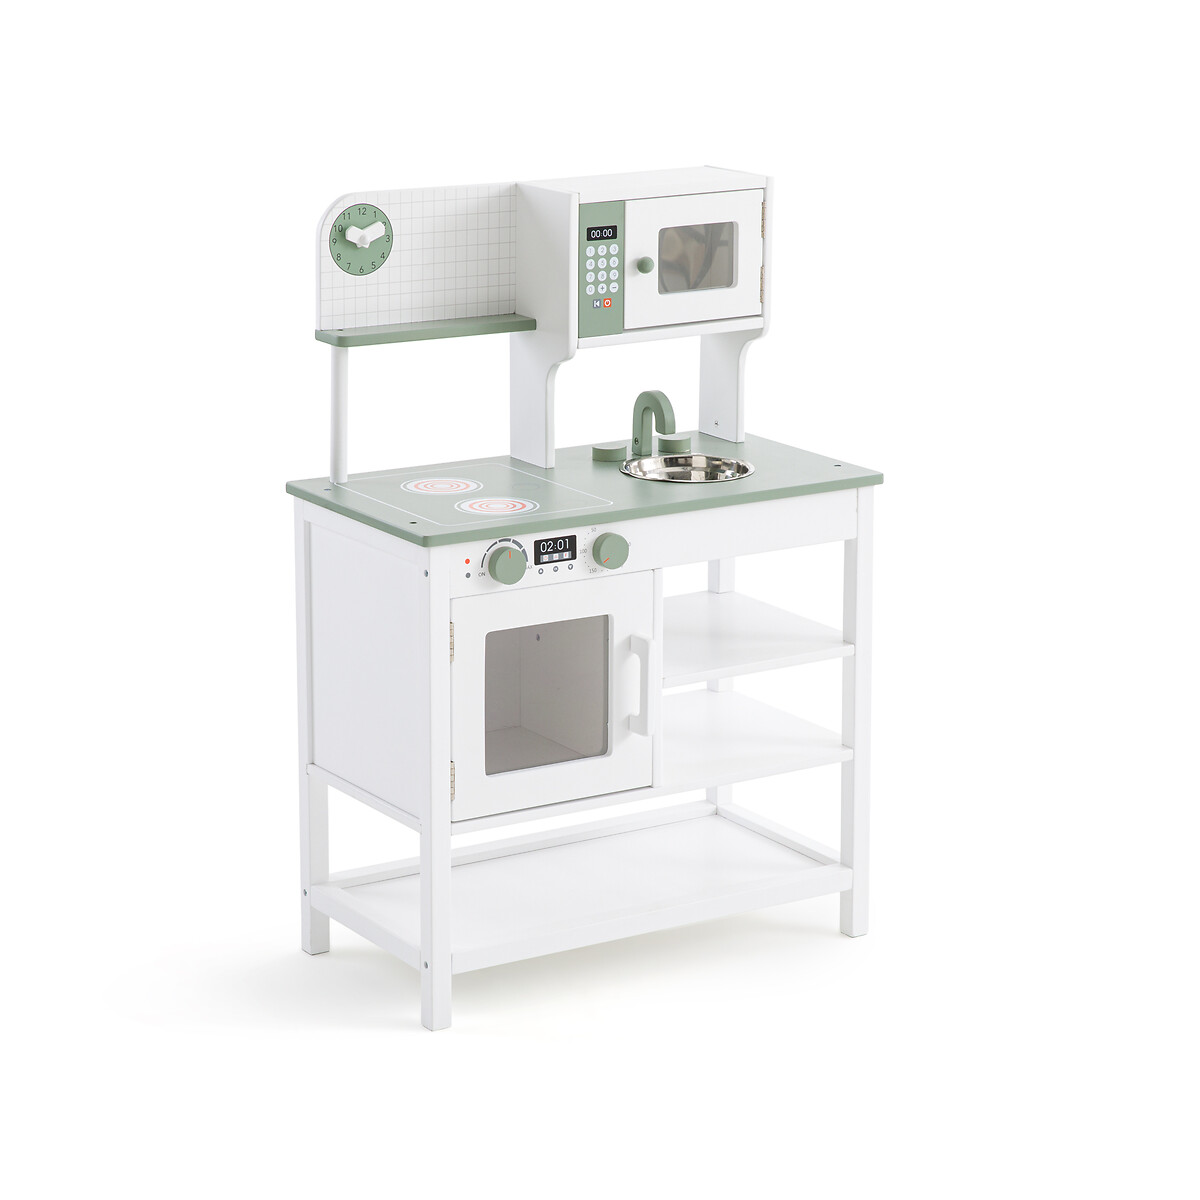 Lonso Child’s Play Kitchen